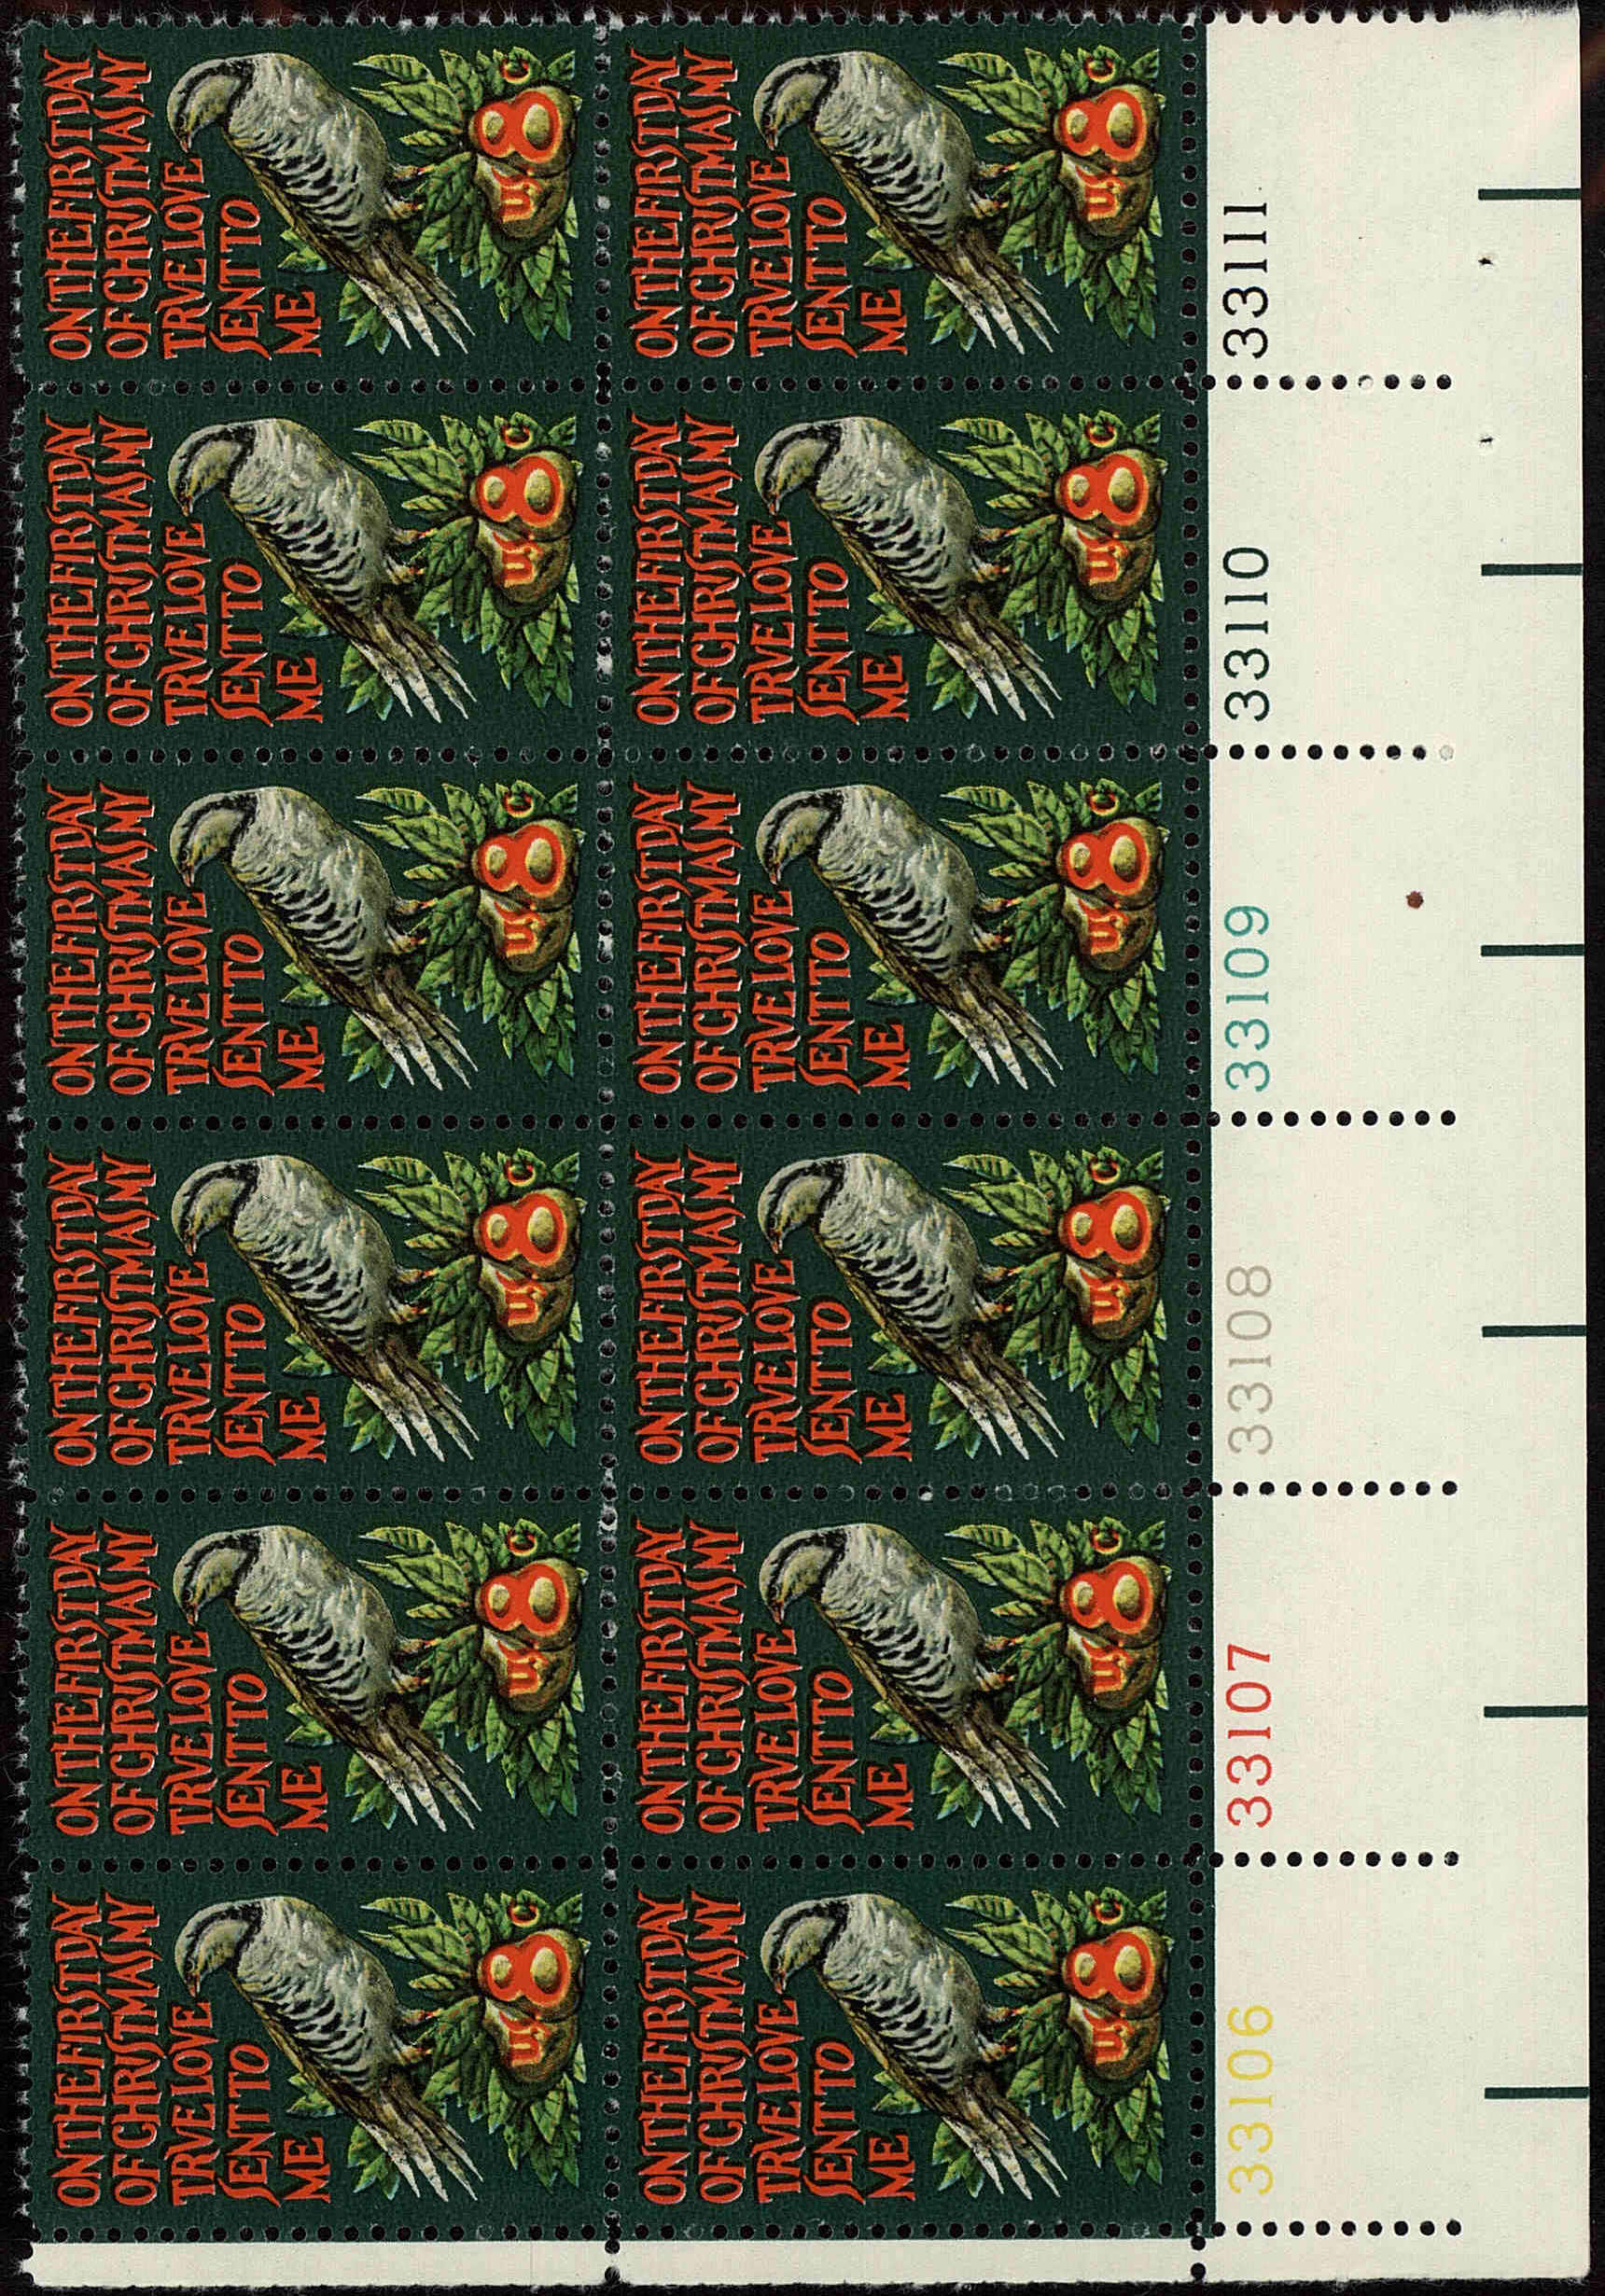 Front view of United States 1445 collectors stamp